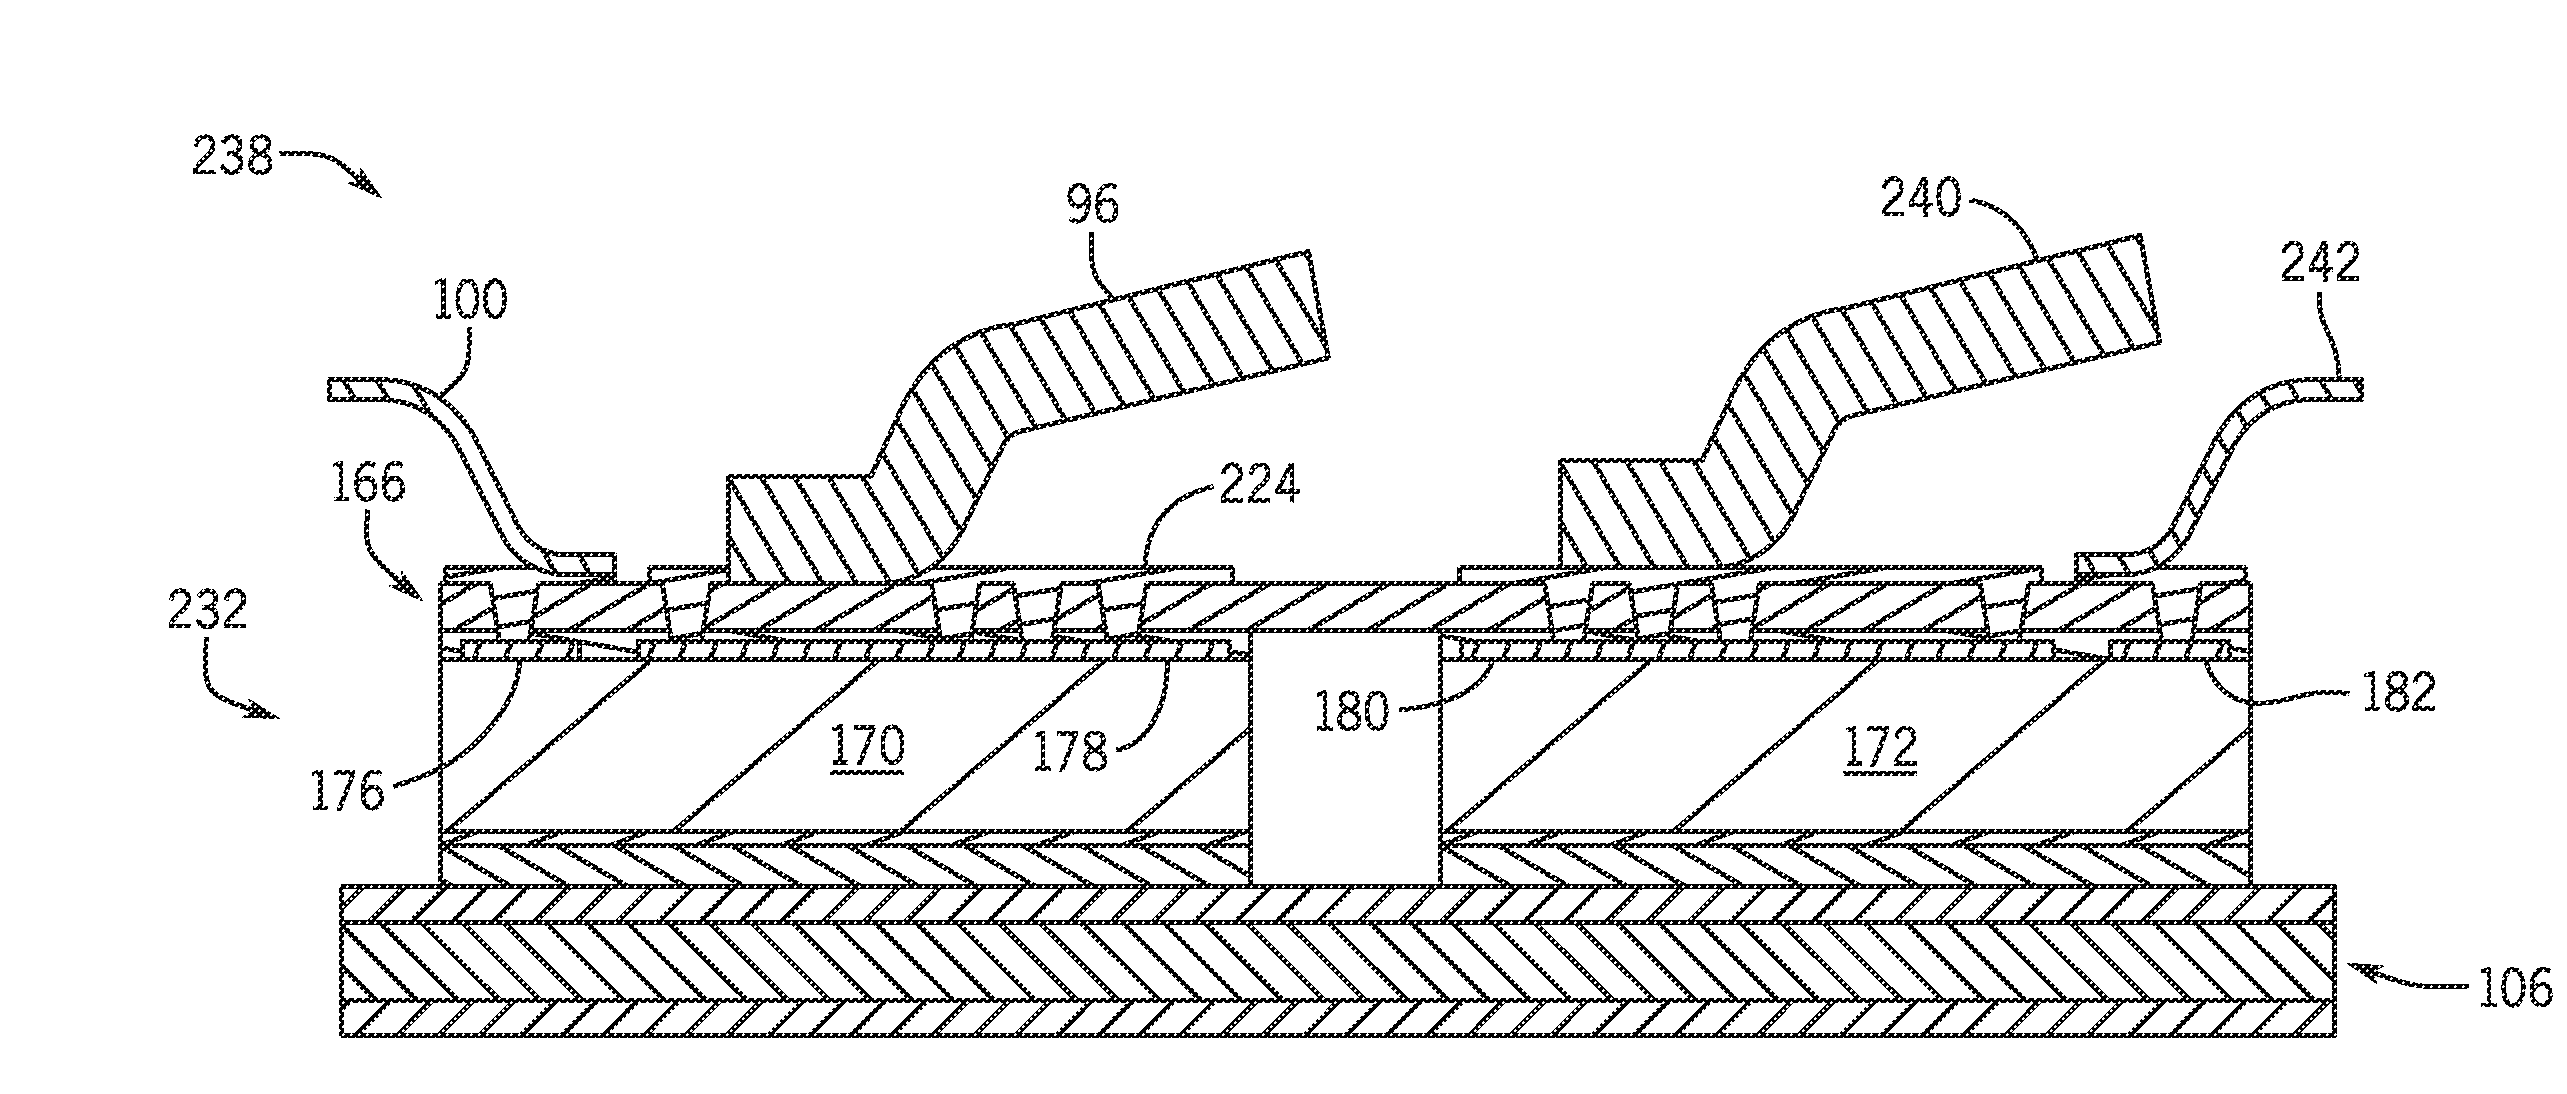 Power overlay structure having wirebonds and method of manufacturing same